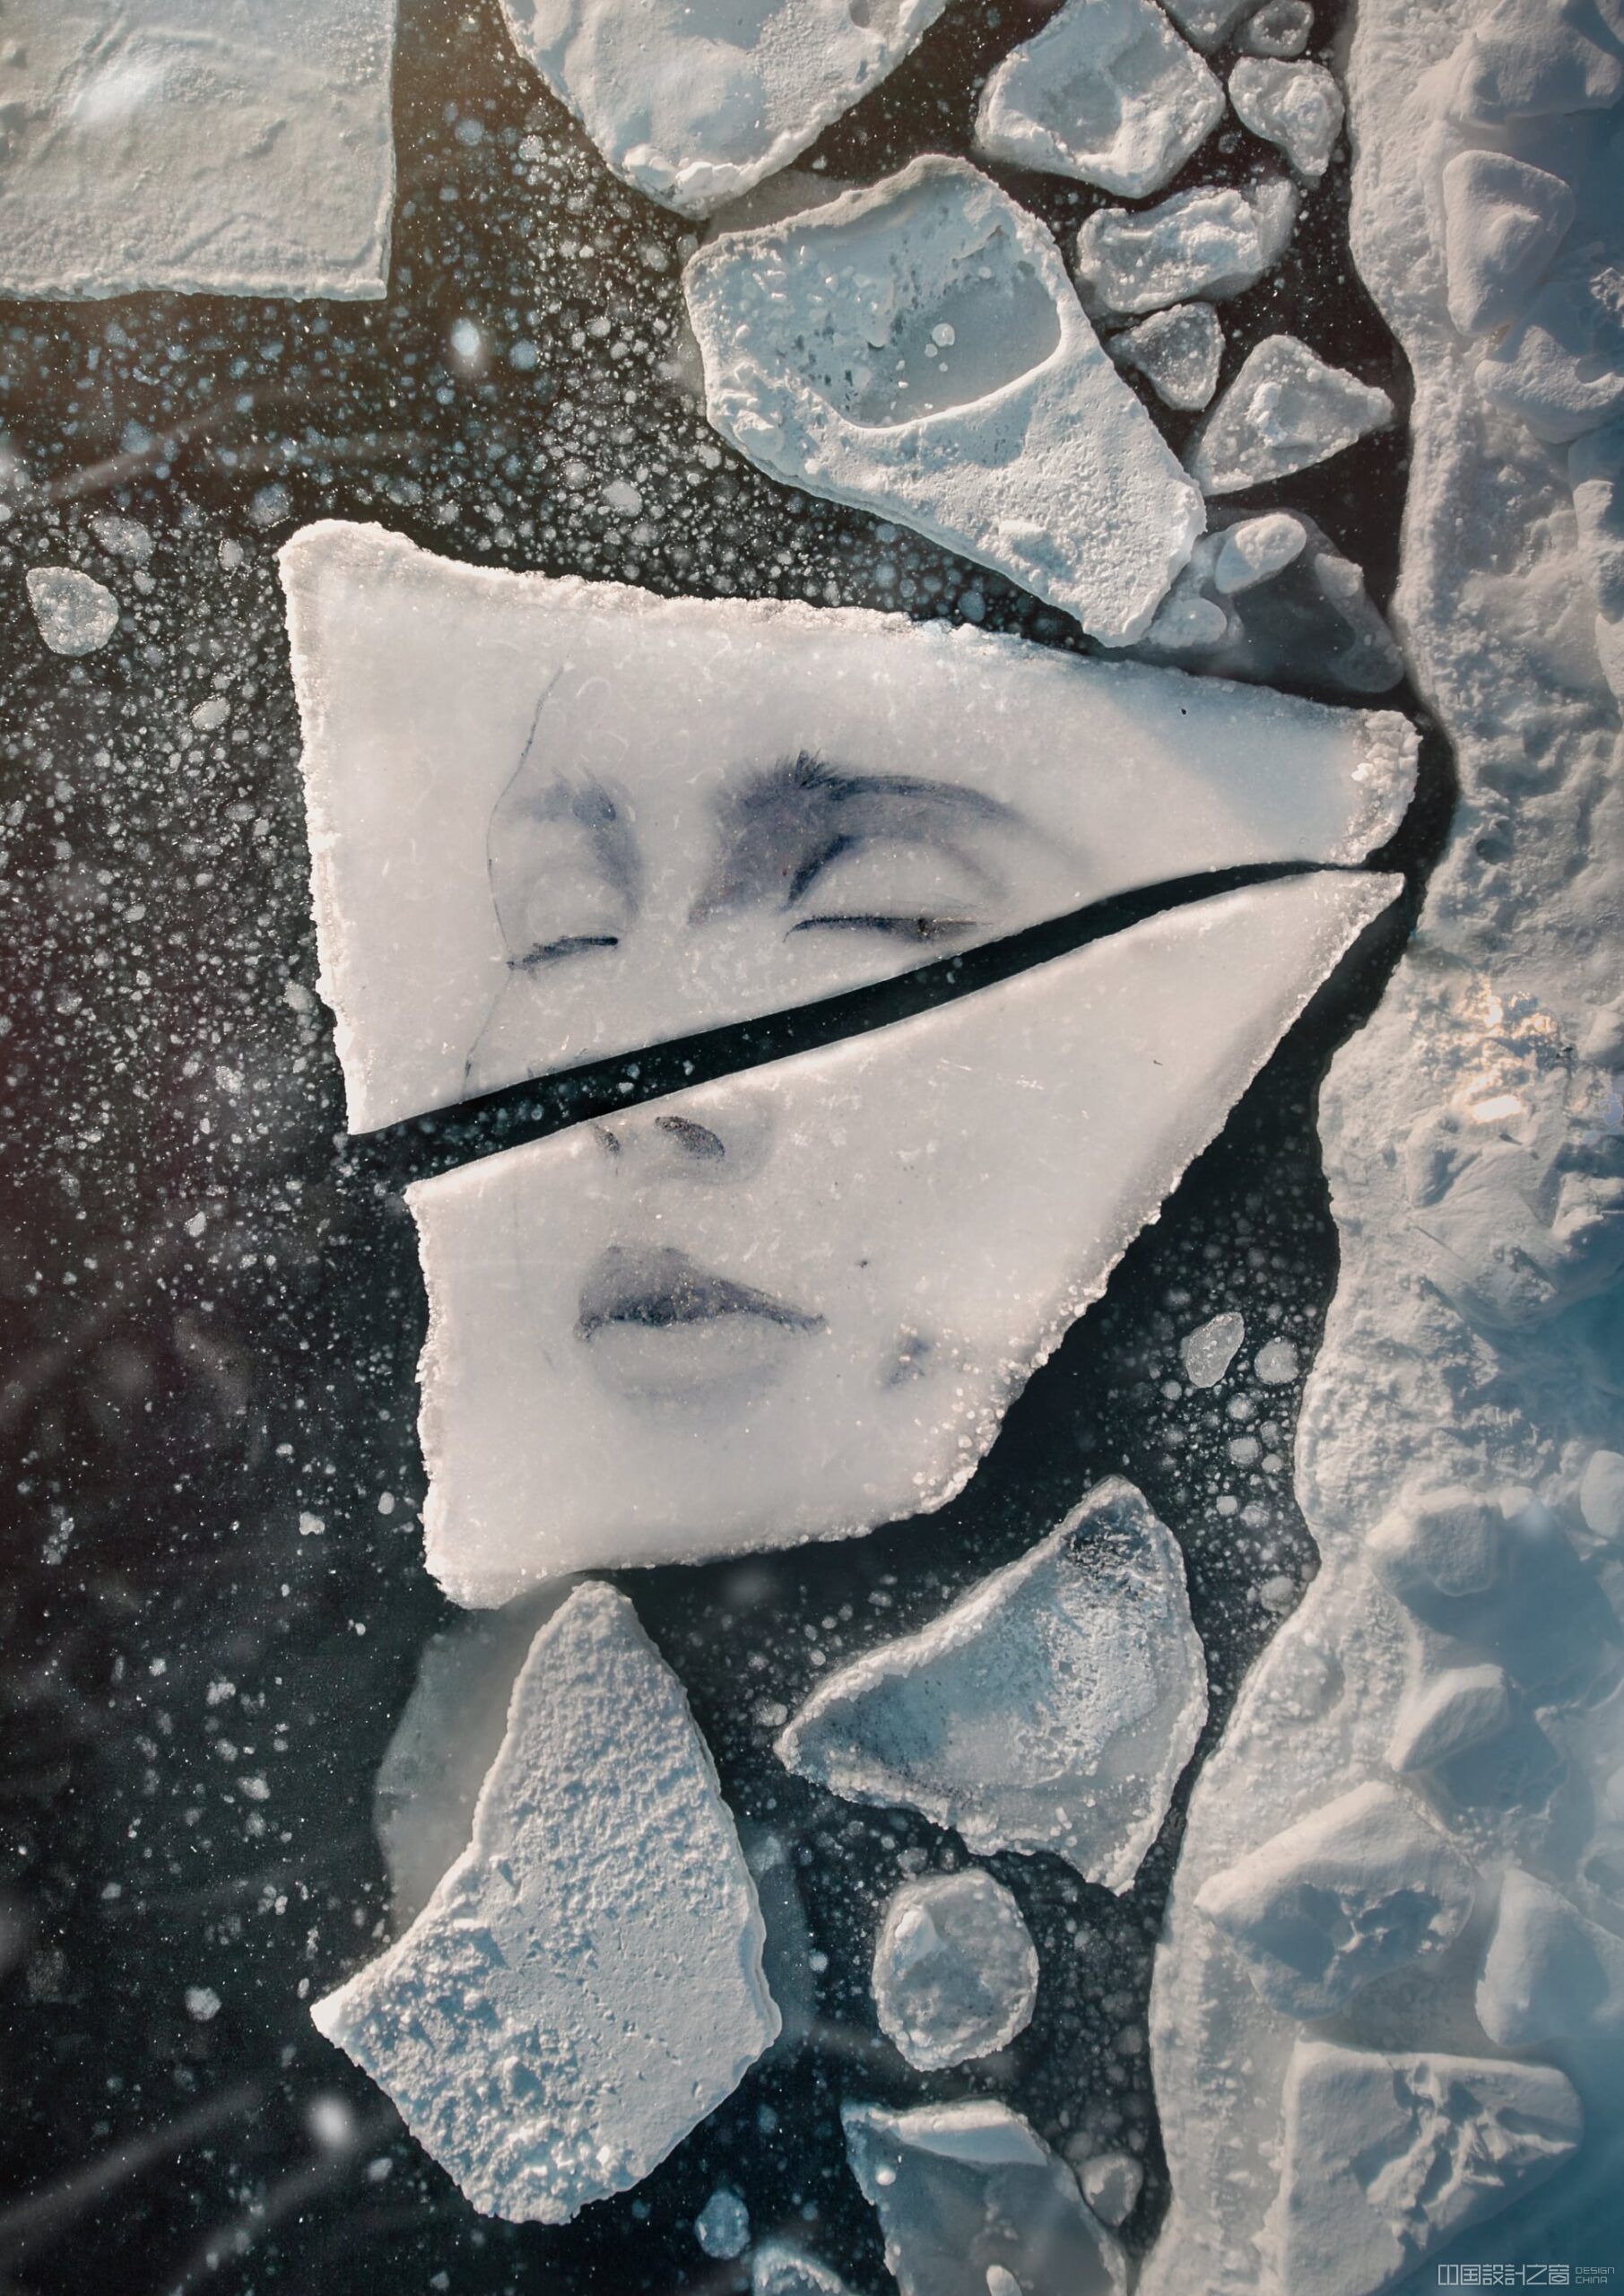 A portrait of a woman is rendered on a fractured ice floe